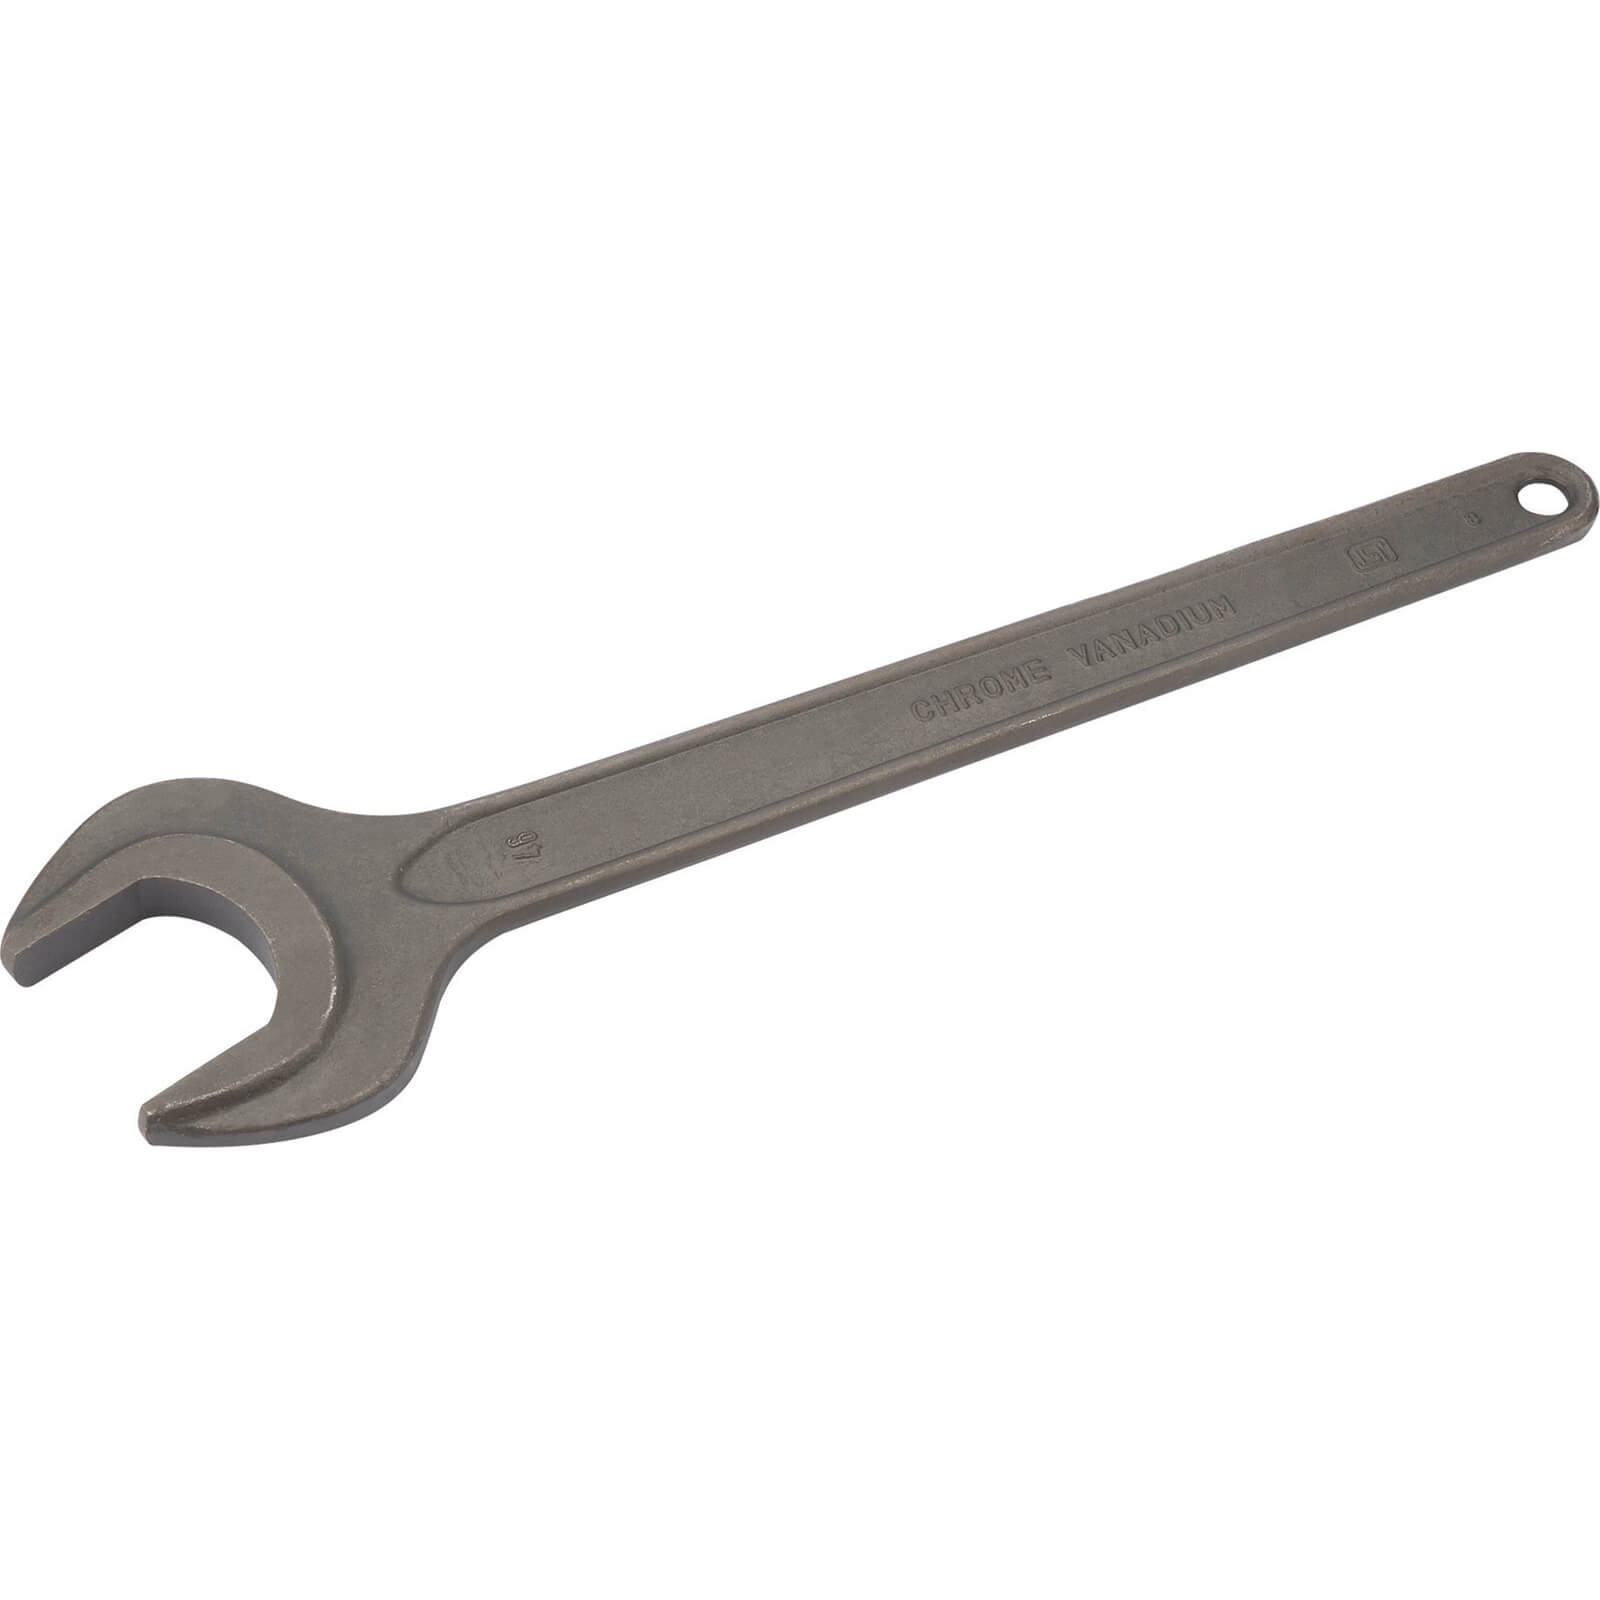 Photos - Wrench Draper Single Open Ended Spanner Metric 46mm 5894 